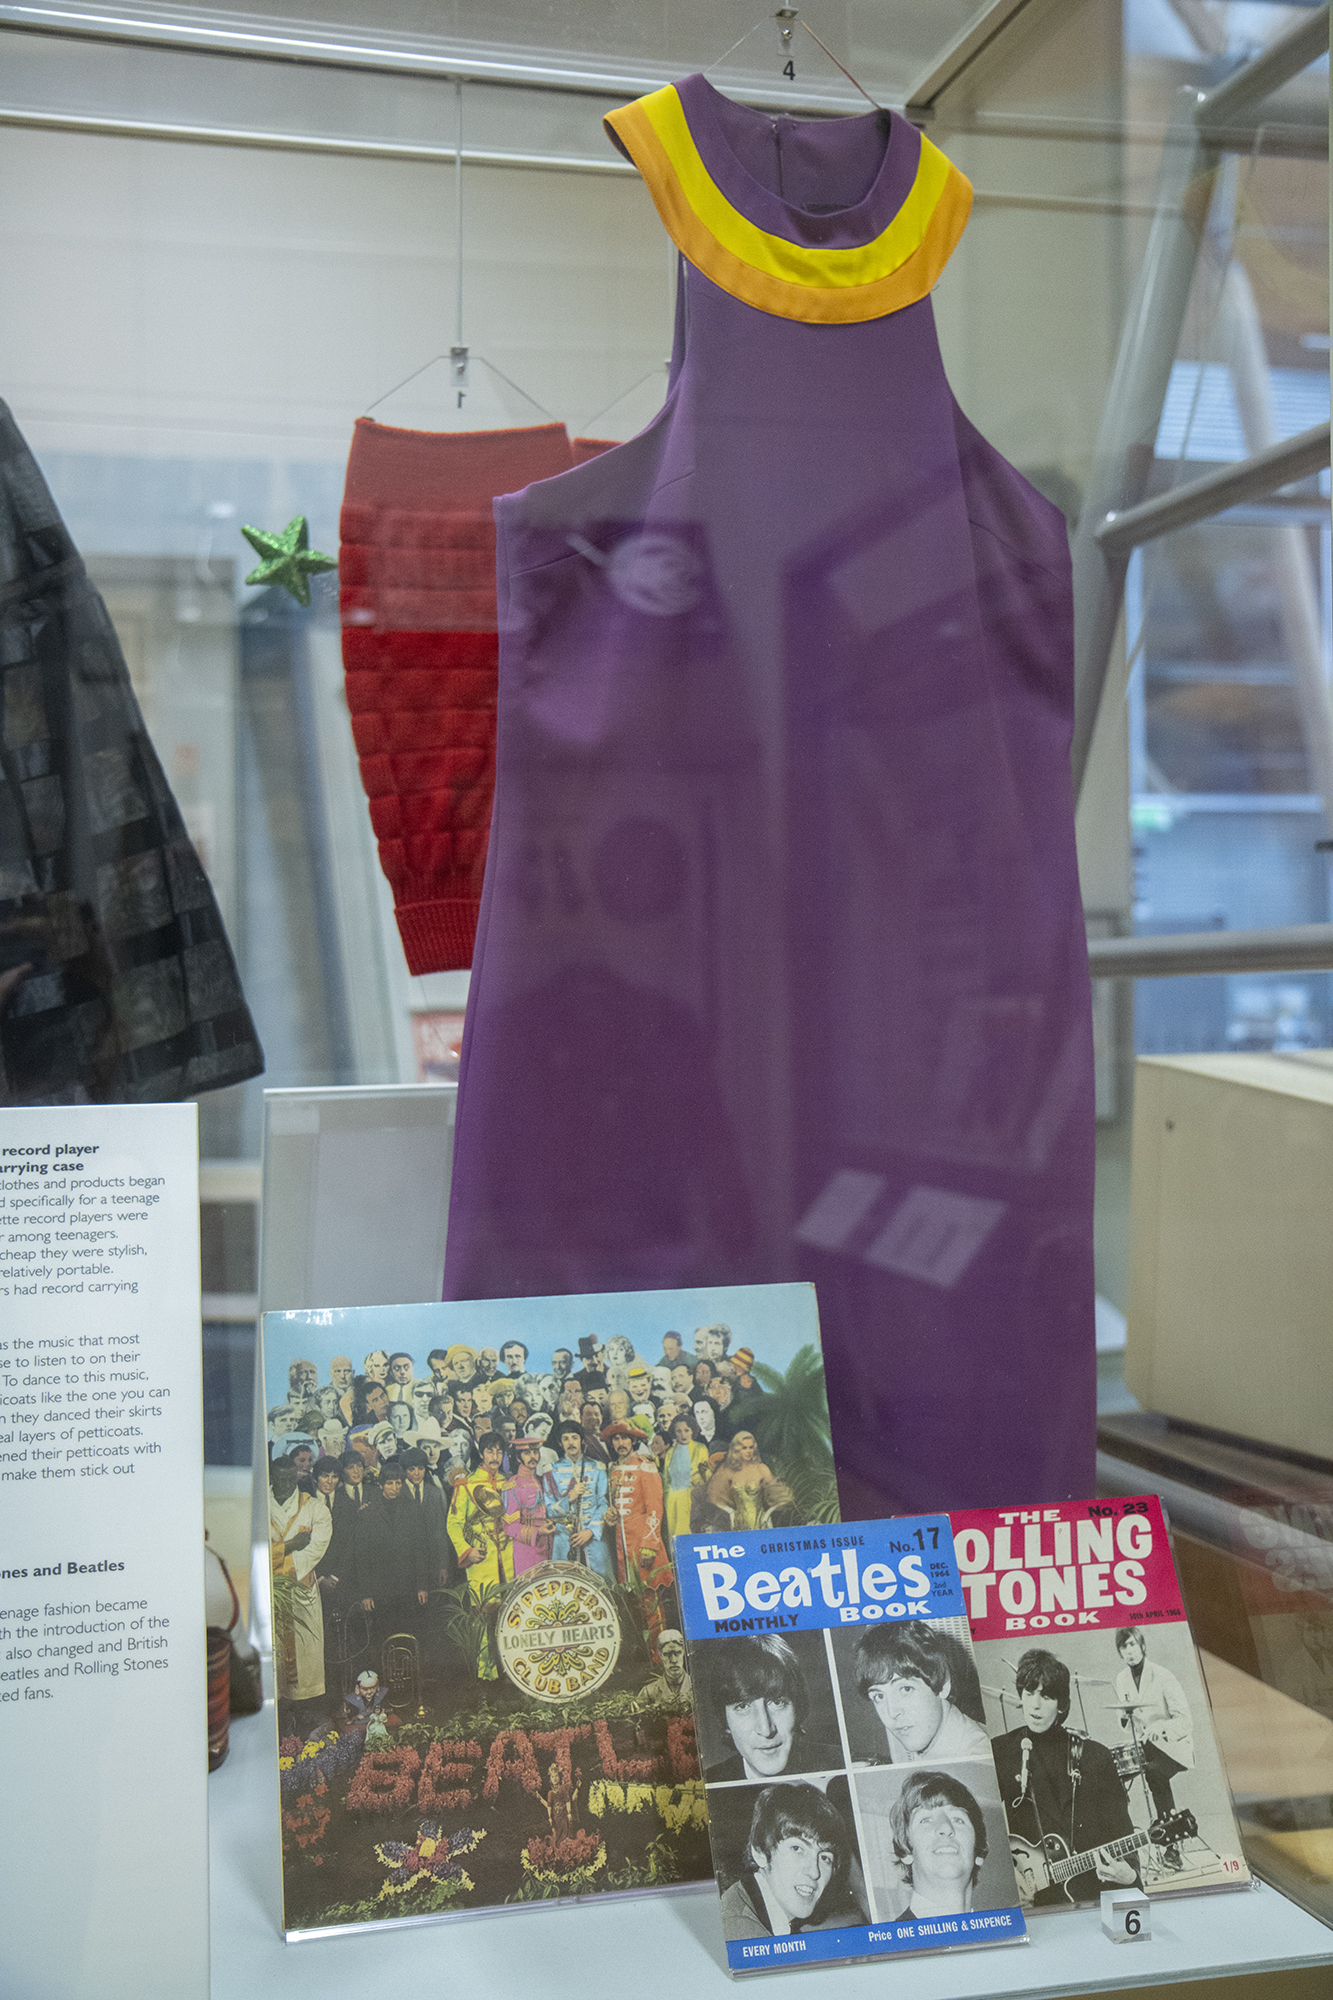 A photograph of a purple, sleeveless mini dress with a bright yellow and orange collar on display in the Herbert's History Gallery alongside a Sgt Pepper's Lonely Hearts Club Band record and two fanzines - one dedicated to the Beatles and the other to the Rolling Stones